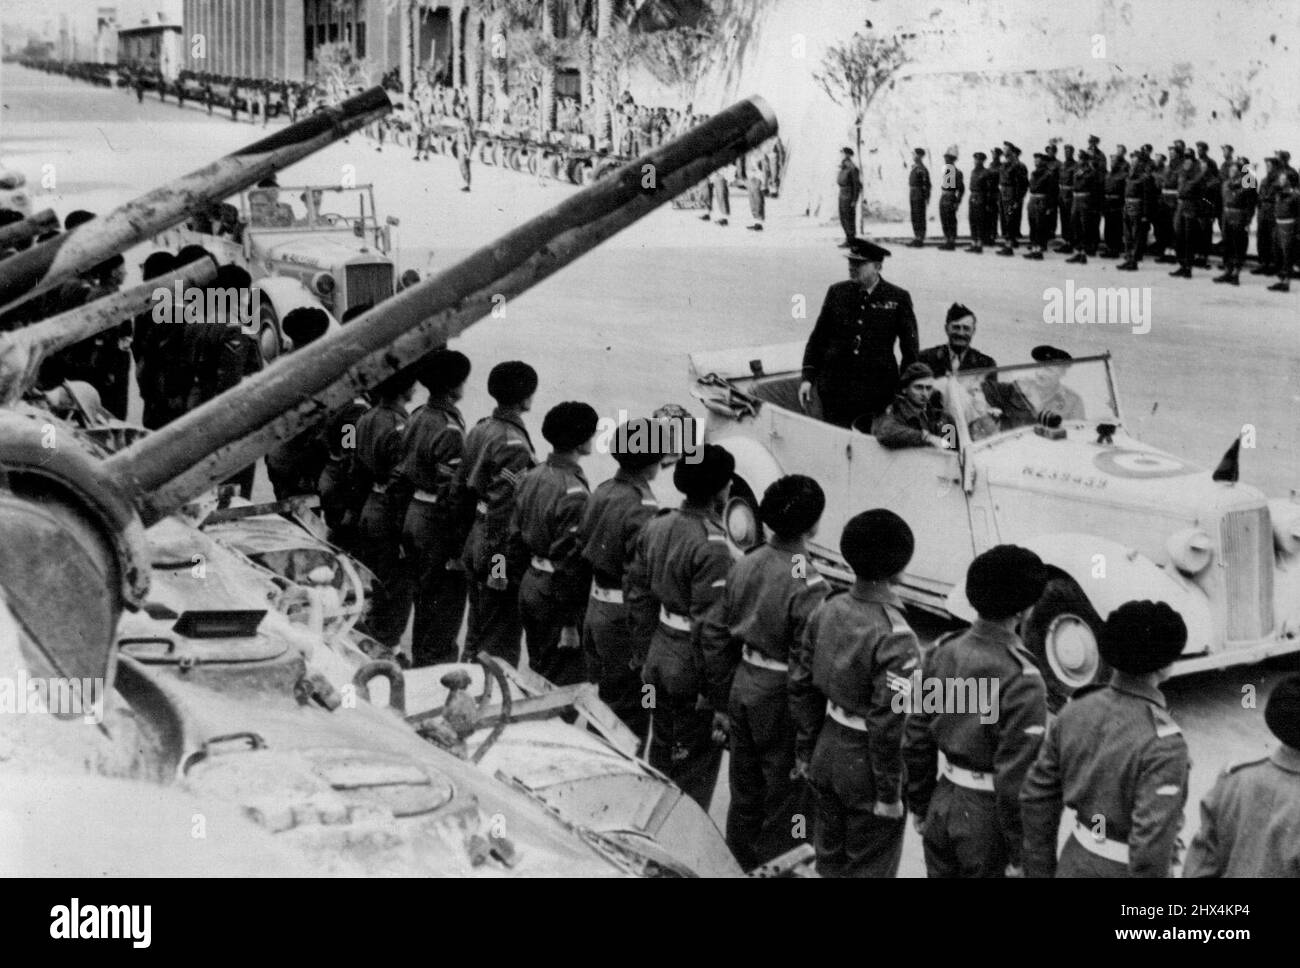 Mr. Churchill's Visit To Tripoli -- The Prime Minister driving down the ranks of men of the Royal Tank Regt. drawn up for inspection in Tripoli. Escorted by a famous fighter squadron Mr. Churchill arrived in his private aircraft at Castel Benito airport Tripoli. He was greeted by General Sir Harold Alexander and General Sir Bernard Montgomery. In a speech to the troops before proceeding to Tripoli itself, he stated that he made the trip for the express purpose of thanking the Eighth Army on behalf of the King for their historic advance. February 1, 1943. (Photo by British Official Photograph). Stock Photo